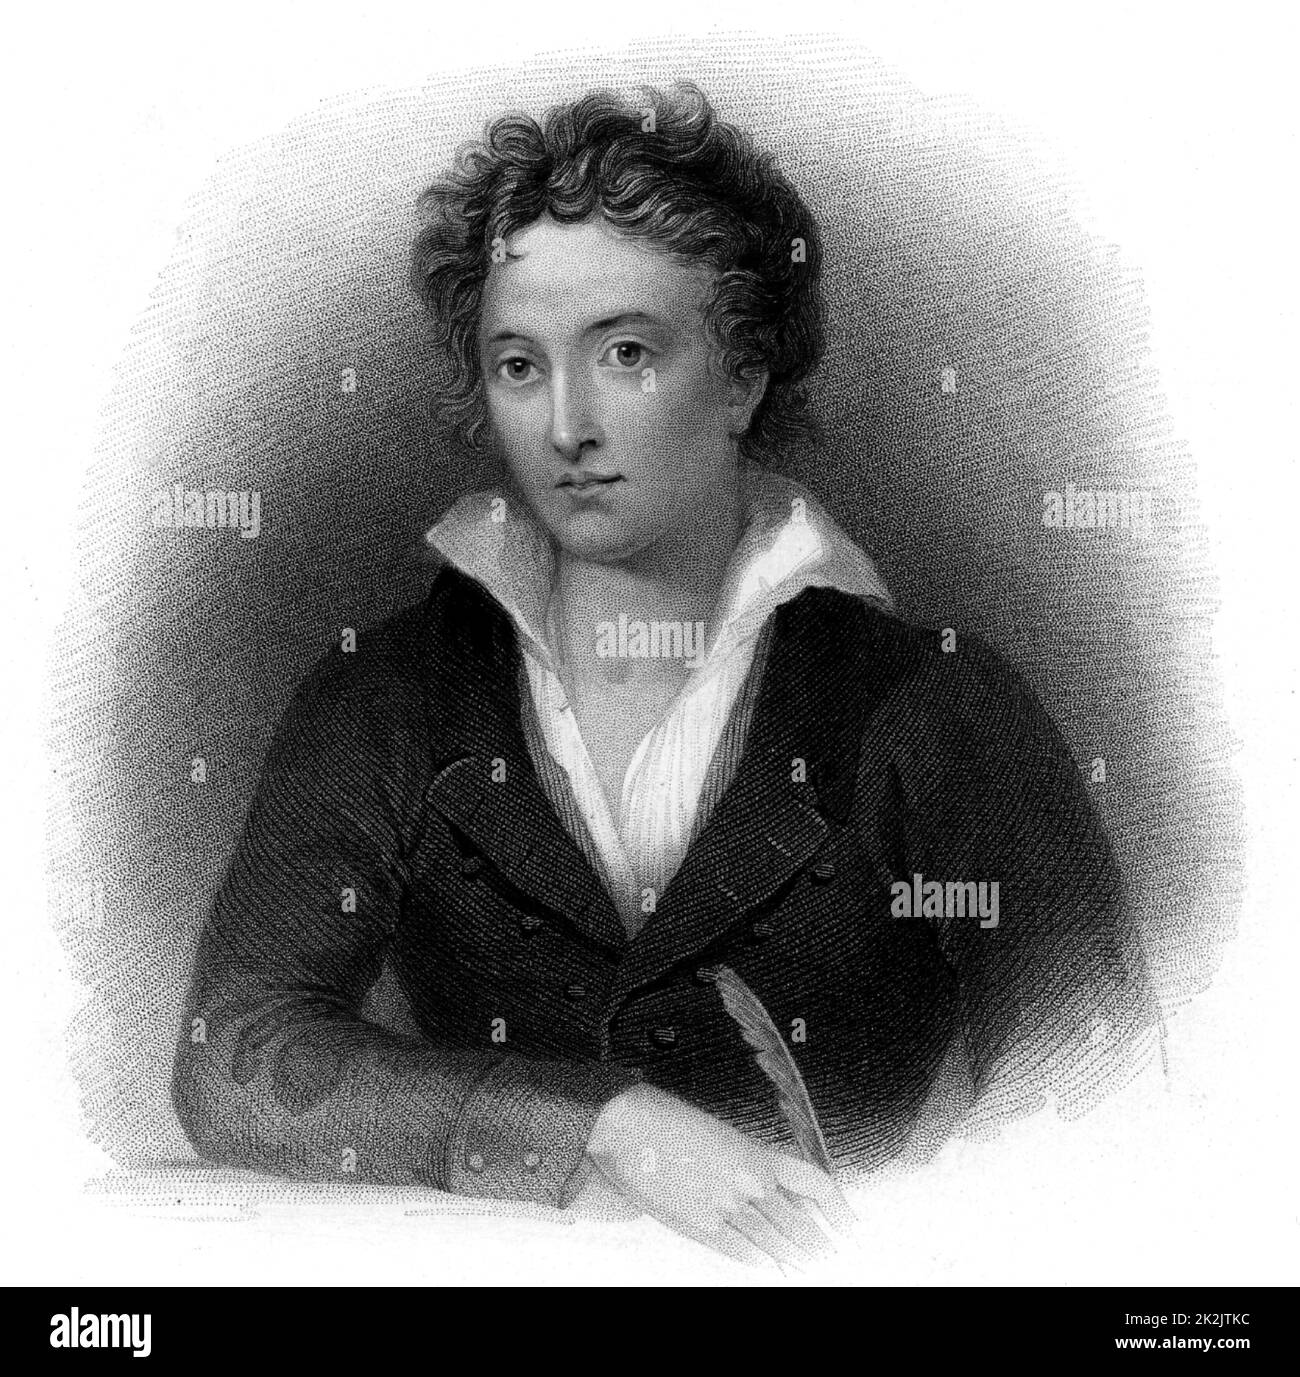 Percy Bysshe Shelley (1792-1822) poeta inglese, nato vicino a Horsham, Sussex. Incisione. Foto Stock